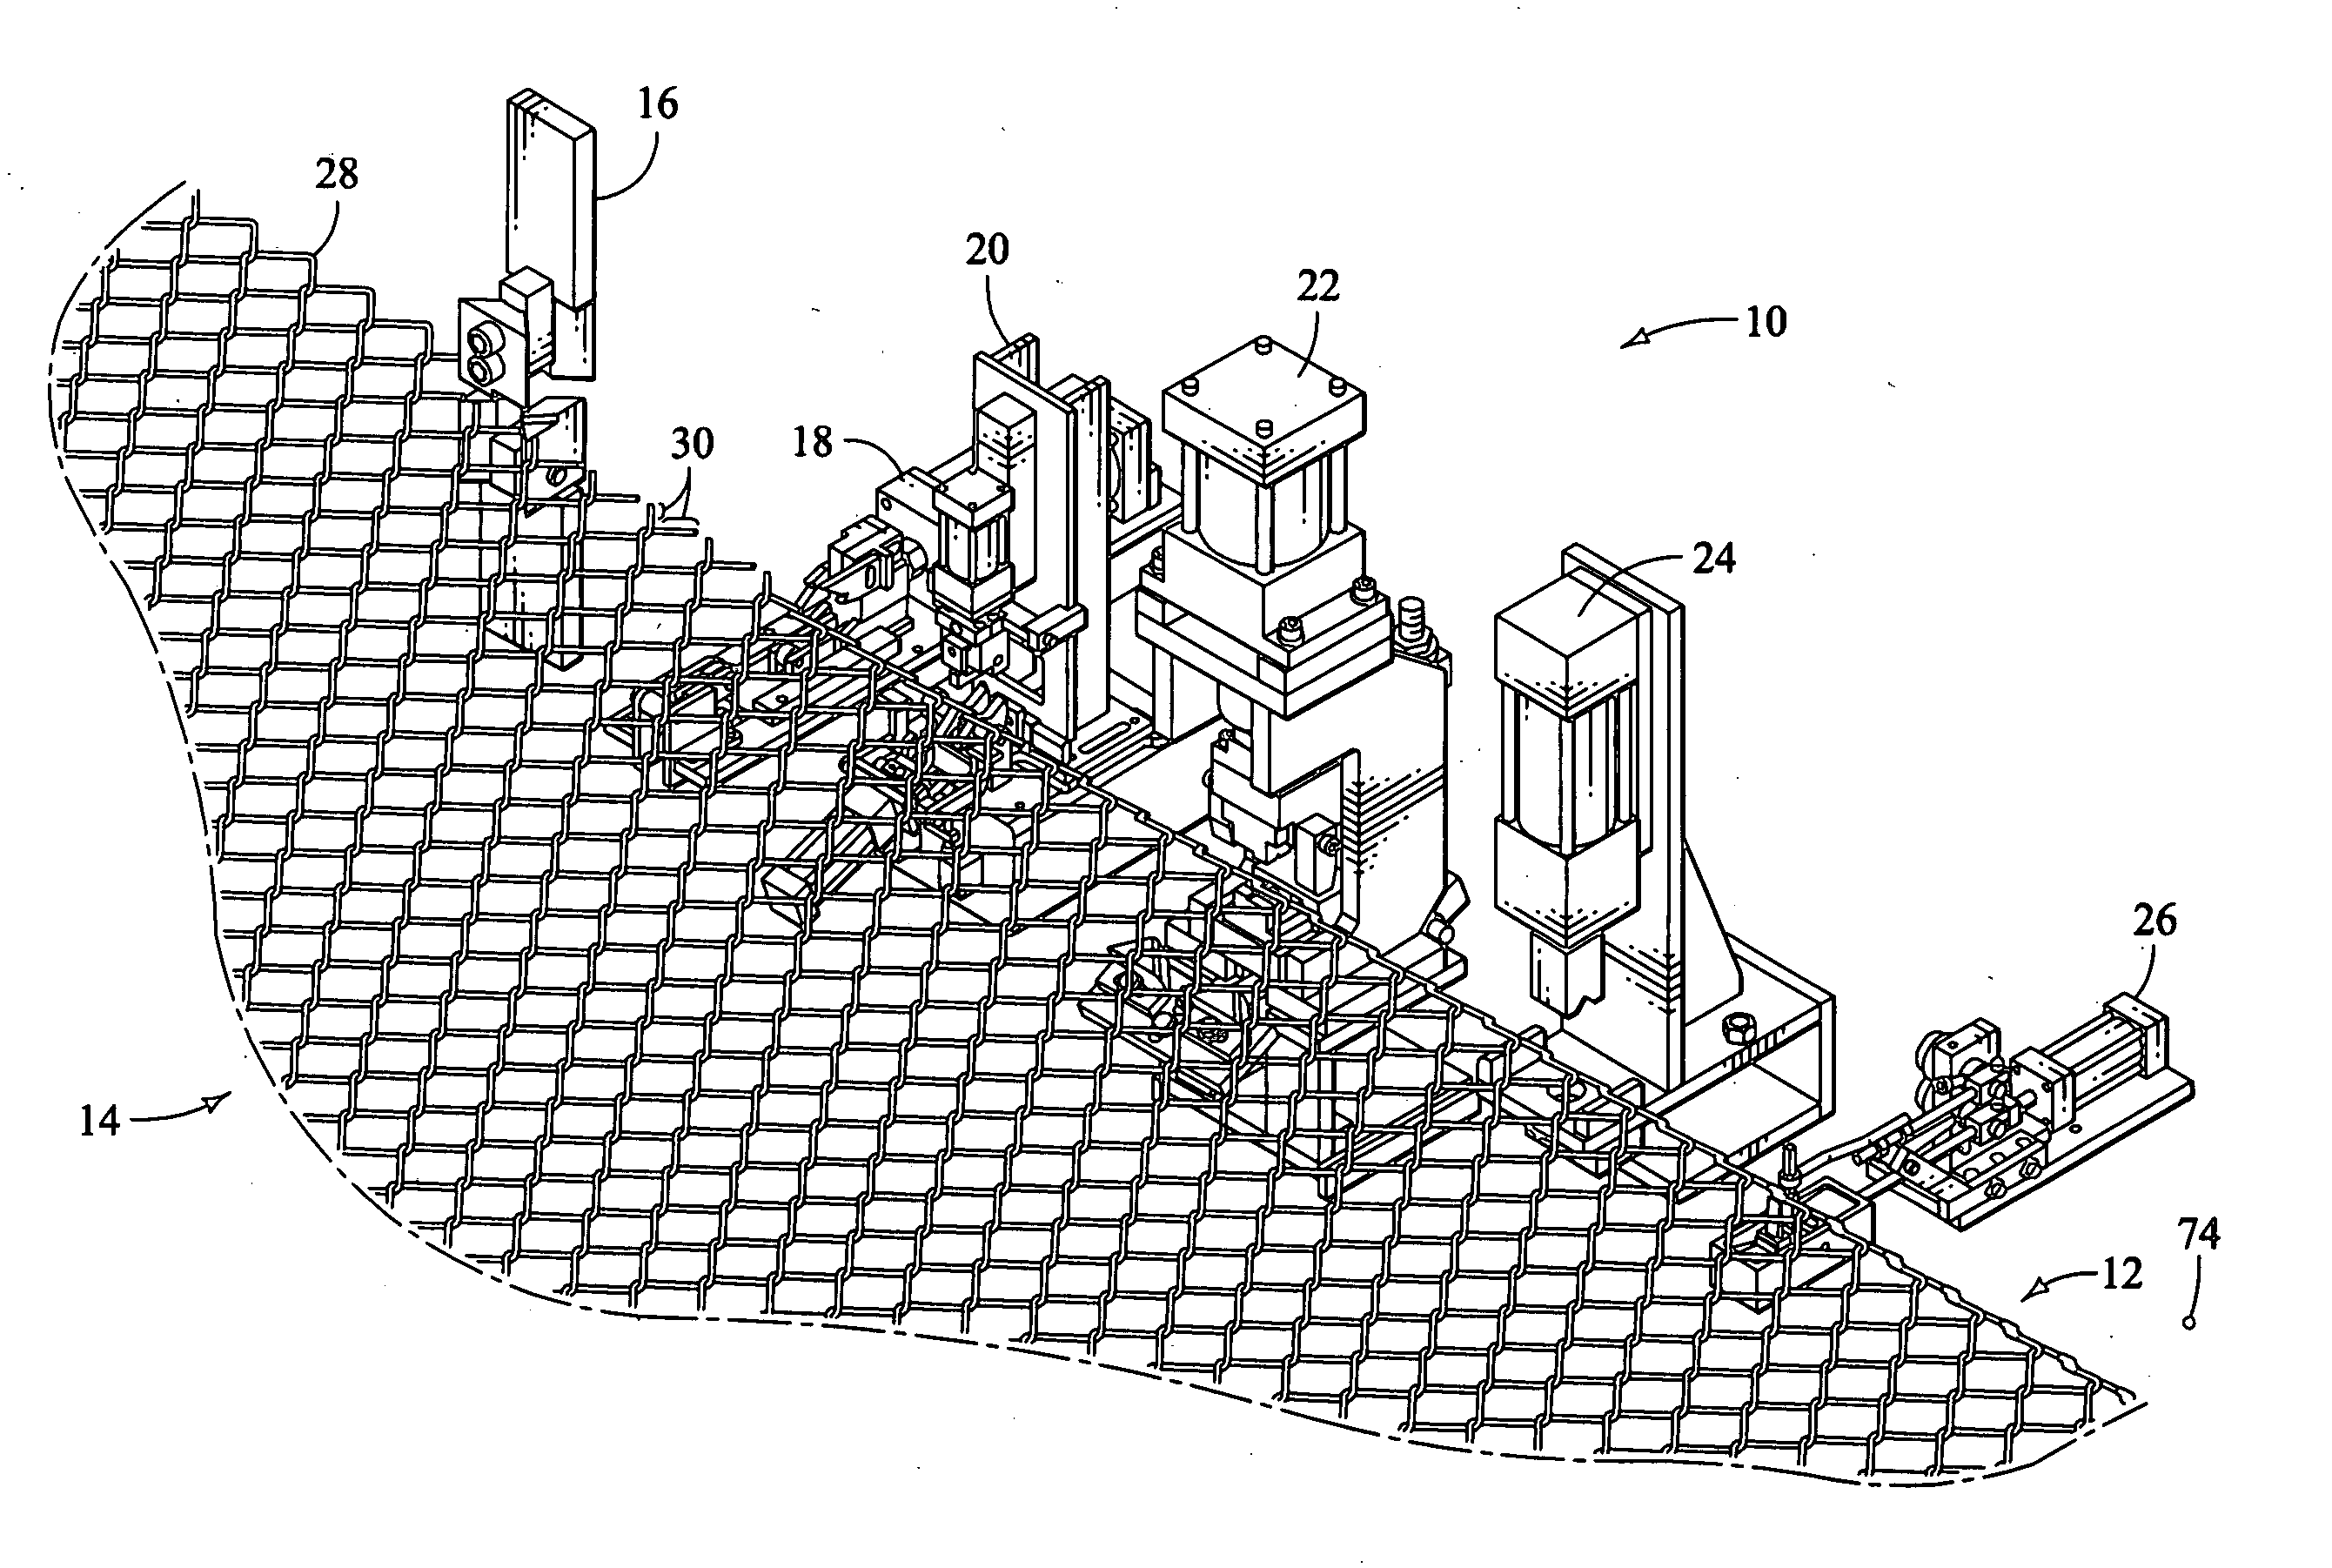 Apparatus and method for making an improved chain link fabric